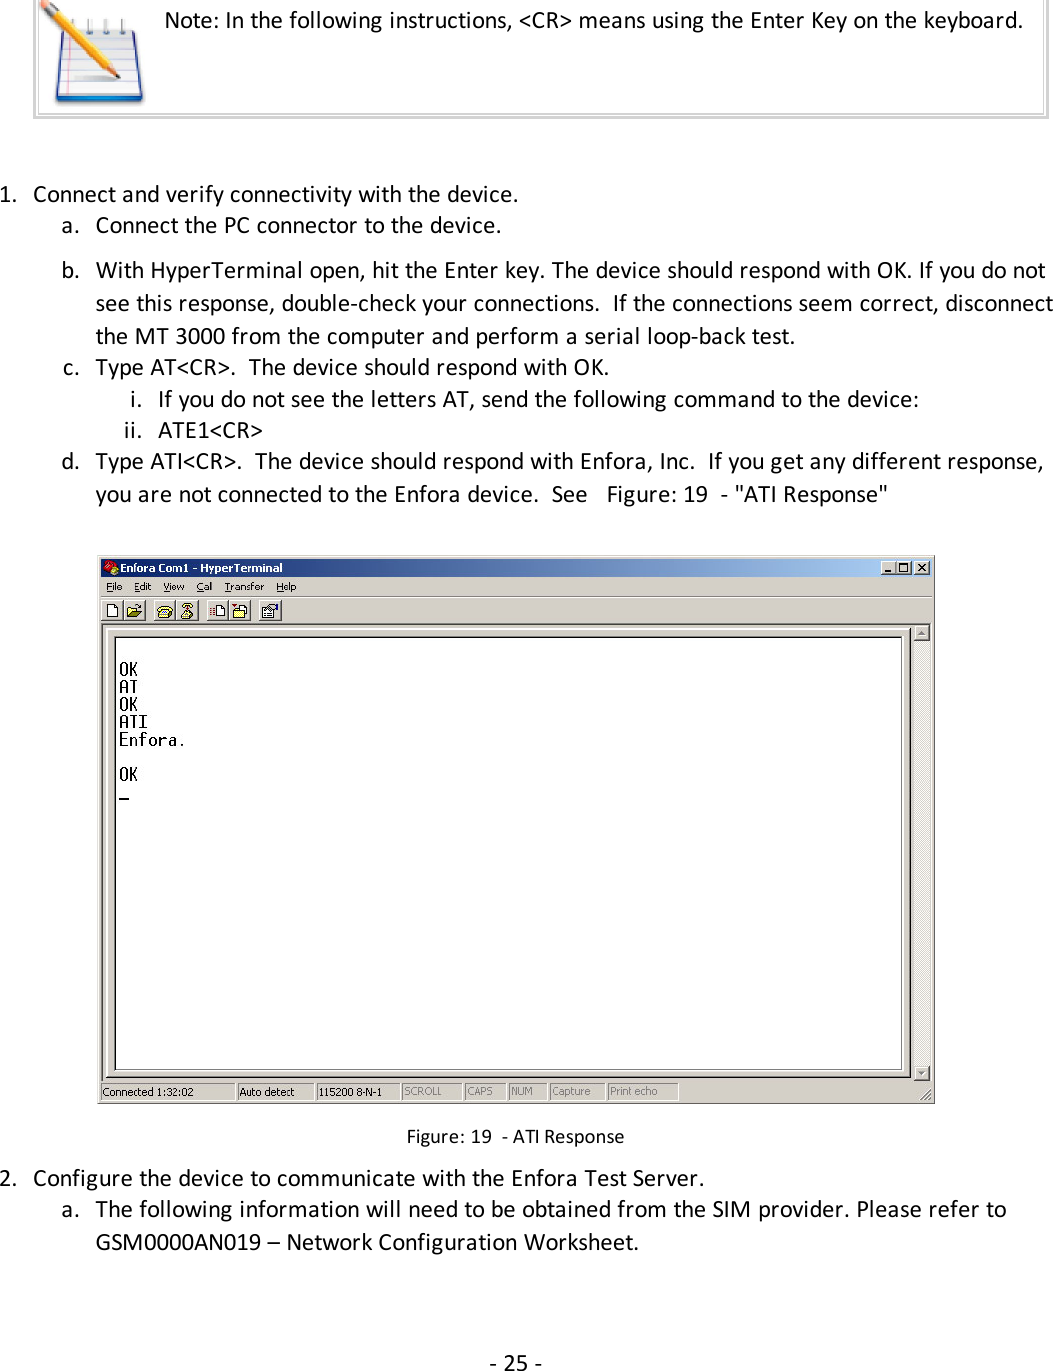 Note: In the following instructions, &lt;CR&gt; means using the Enter Key on the keyboard.1. Connect and verify connectivity with the device.a. Connect the PC connector to the device.b. With HyperTerminal open, hit the Enter key. The device should respond with OK. If you do notsee this response, double-check your connections. If the connections seem correct, disconnectthe MT 3000 from the computer and perform a serial loop-back test.c. Type AT&lt;CR&gt;. The device should respond with OK.i. If you do not see the letters AT, send the following command to the device:ii. ATE1&lt;CR&gt;d. Type ATI&lt;CR&gt;. The device should respond with Enfora, Inc. If you get any different response,you are not connected to the Enfora device. See Figure: 19 - &quot;ATI Response&quot;Figure: 19 - ATI Response2. Configure the device to communicate with the Enfora Test Server.a. The following information will need to be obtained from the SIM provider. Please refer toGSM0000AN019 – Network Configuration Worksheet.- 25 -